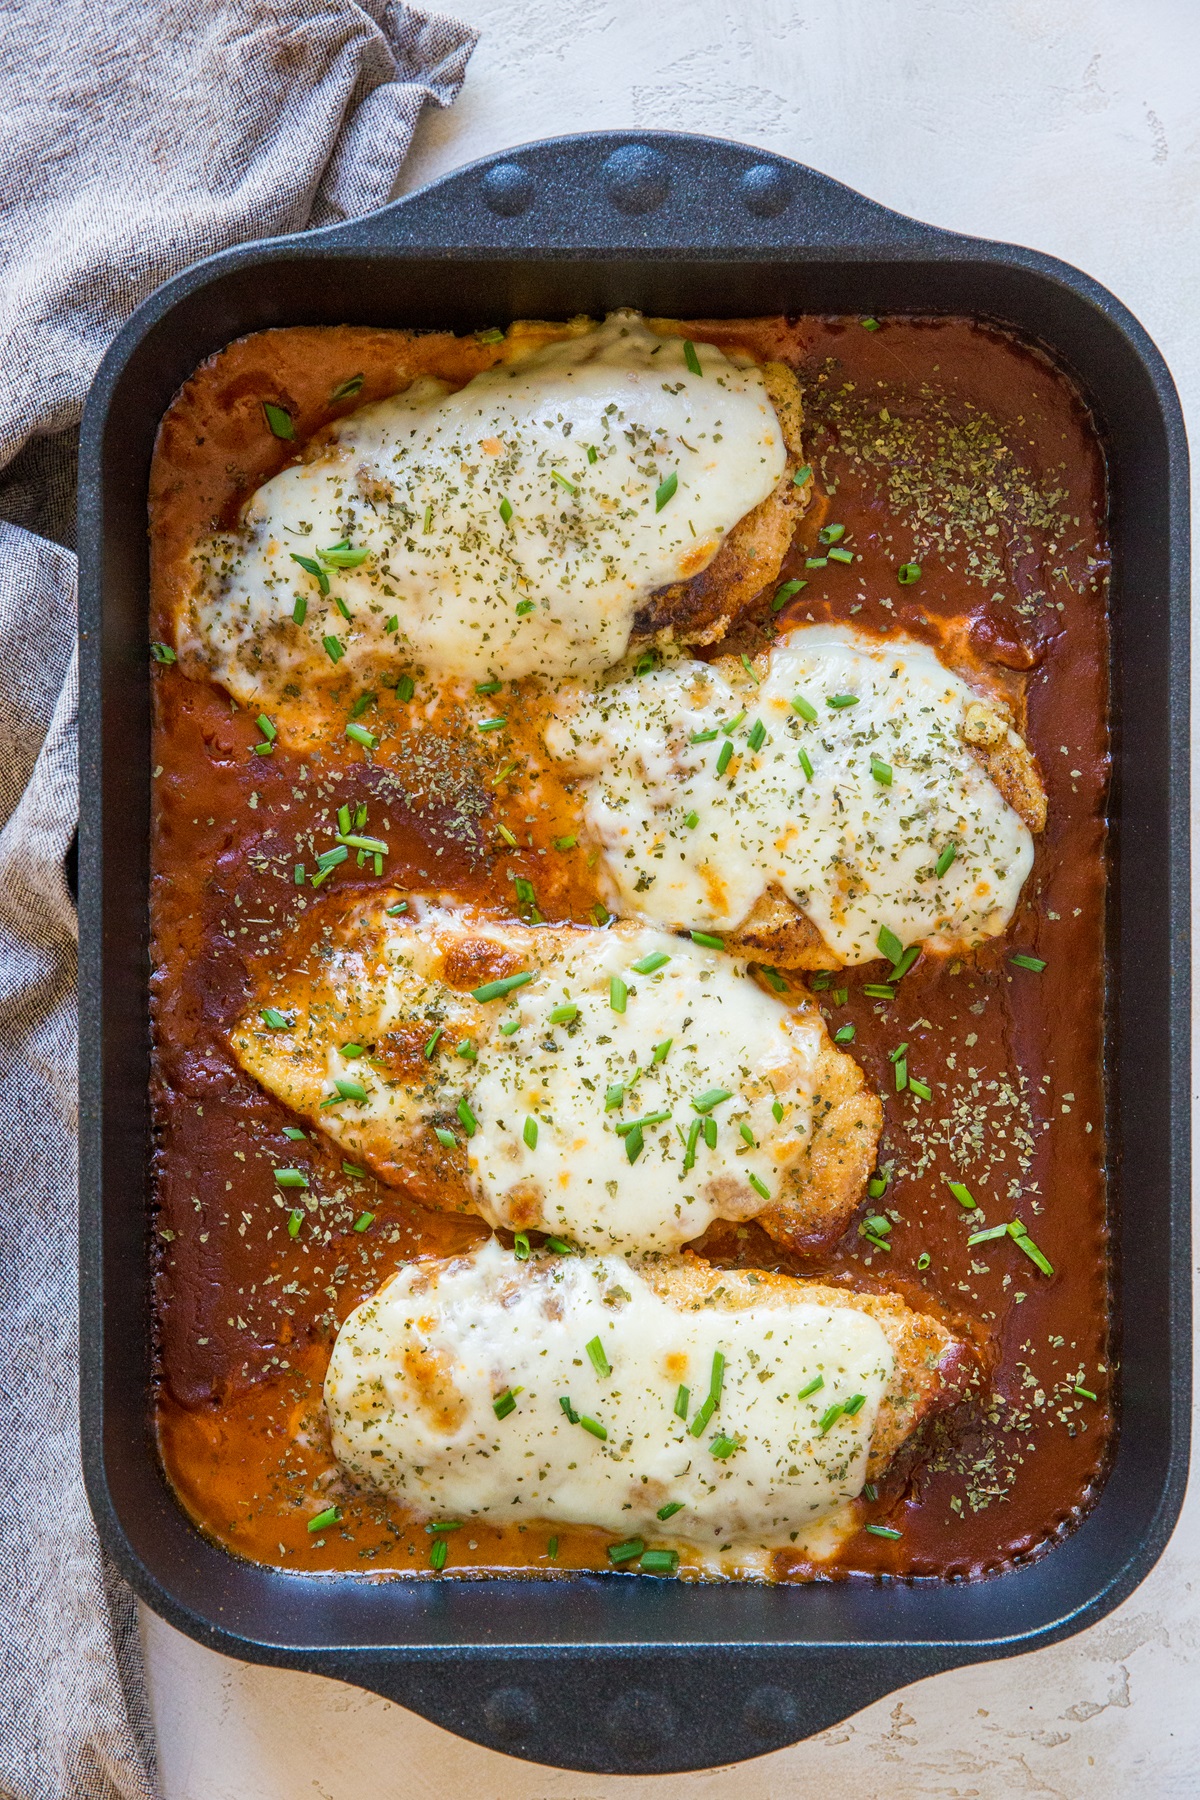 Low-Carb Keto Chicken Parmesan - baked chicken parmesan made gluten-free, grain-free, and keto